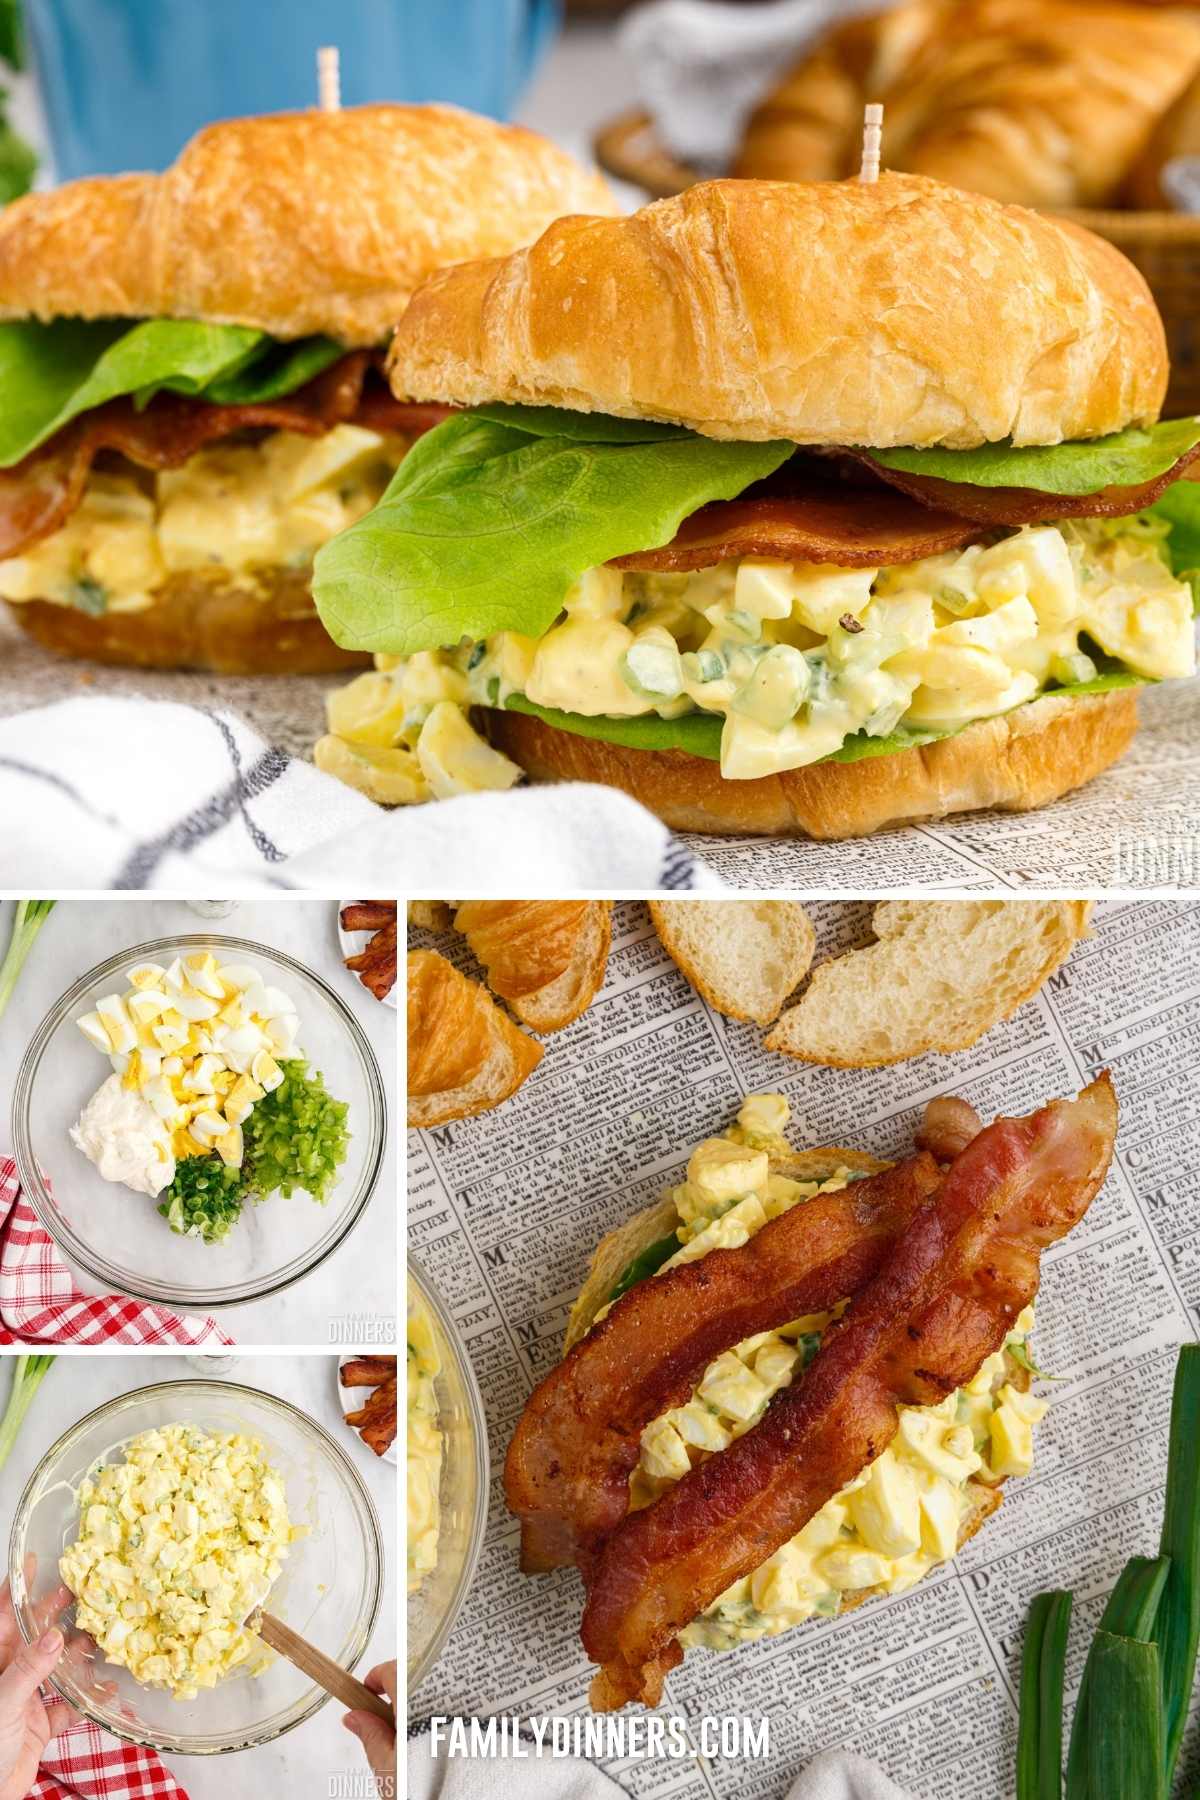 Collage of photos showing the process of making egg salad sandwiches. Close up of egg salad sandwiches complete on croissants with bacon and lettuce. Smaller photos show ingredients in a mixing bowl, and an open-faced egg salad sandwich topped with bacon.